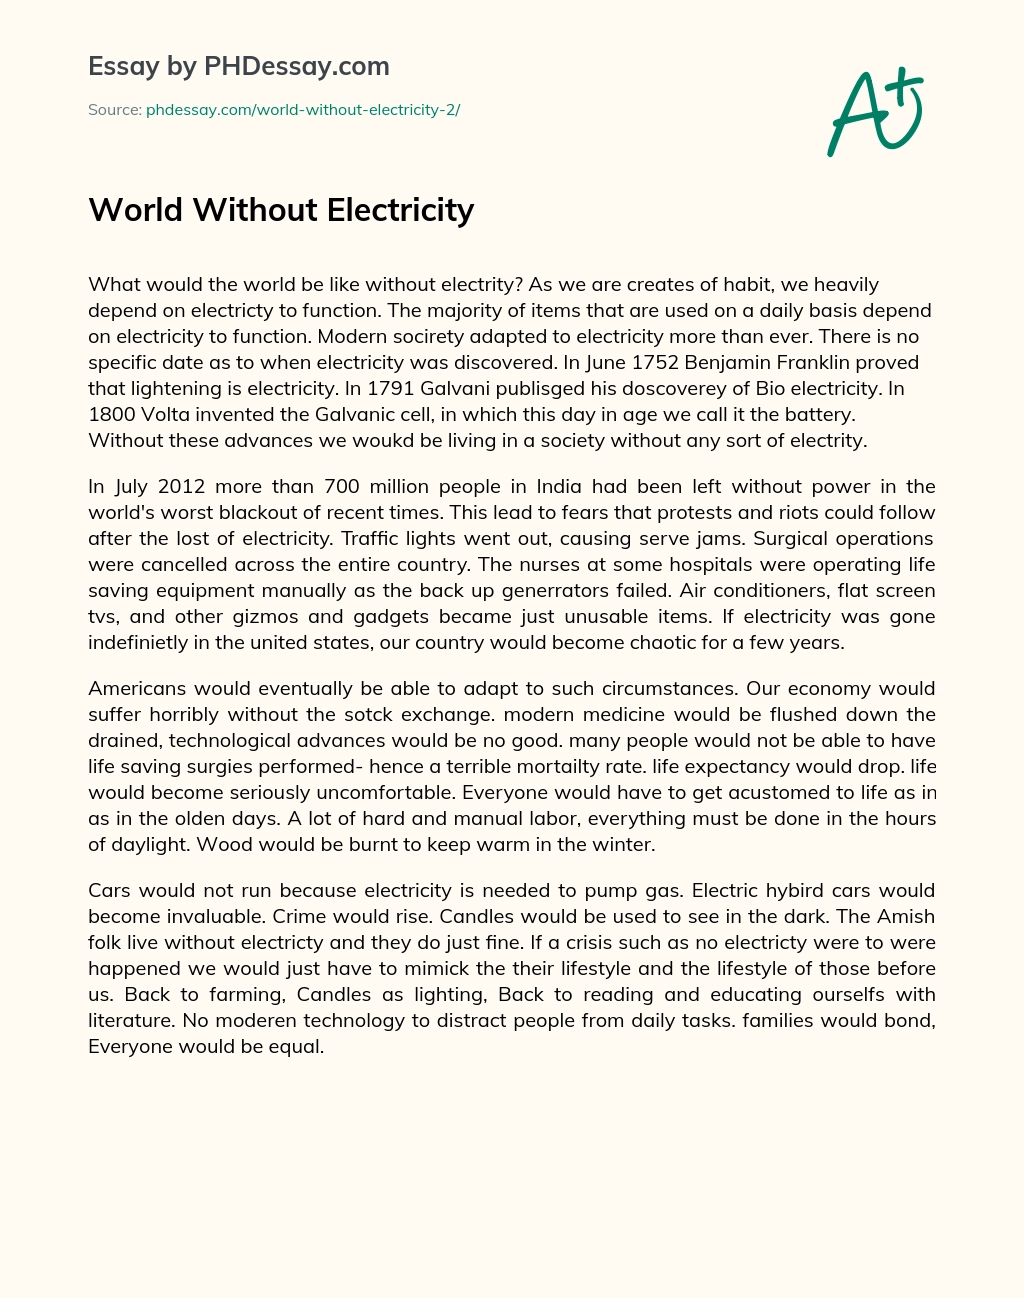 World Without Electricity essay